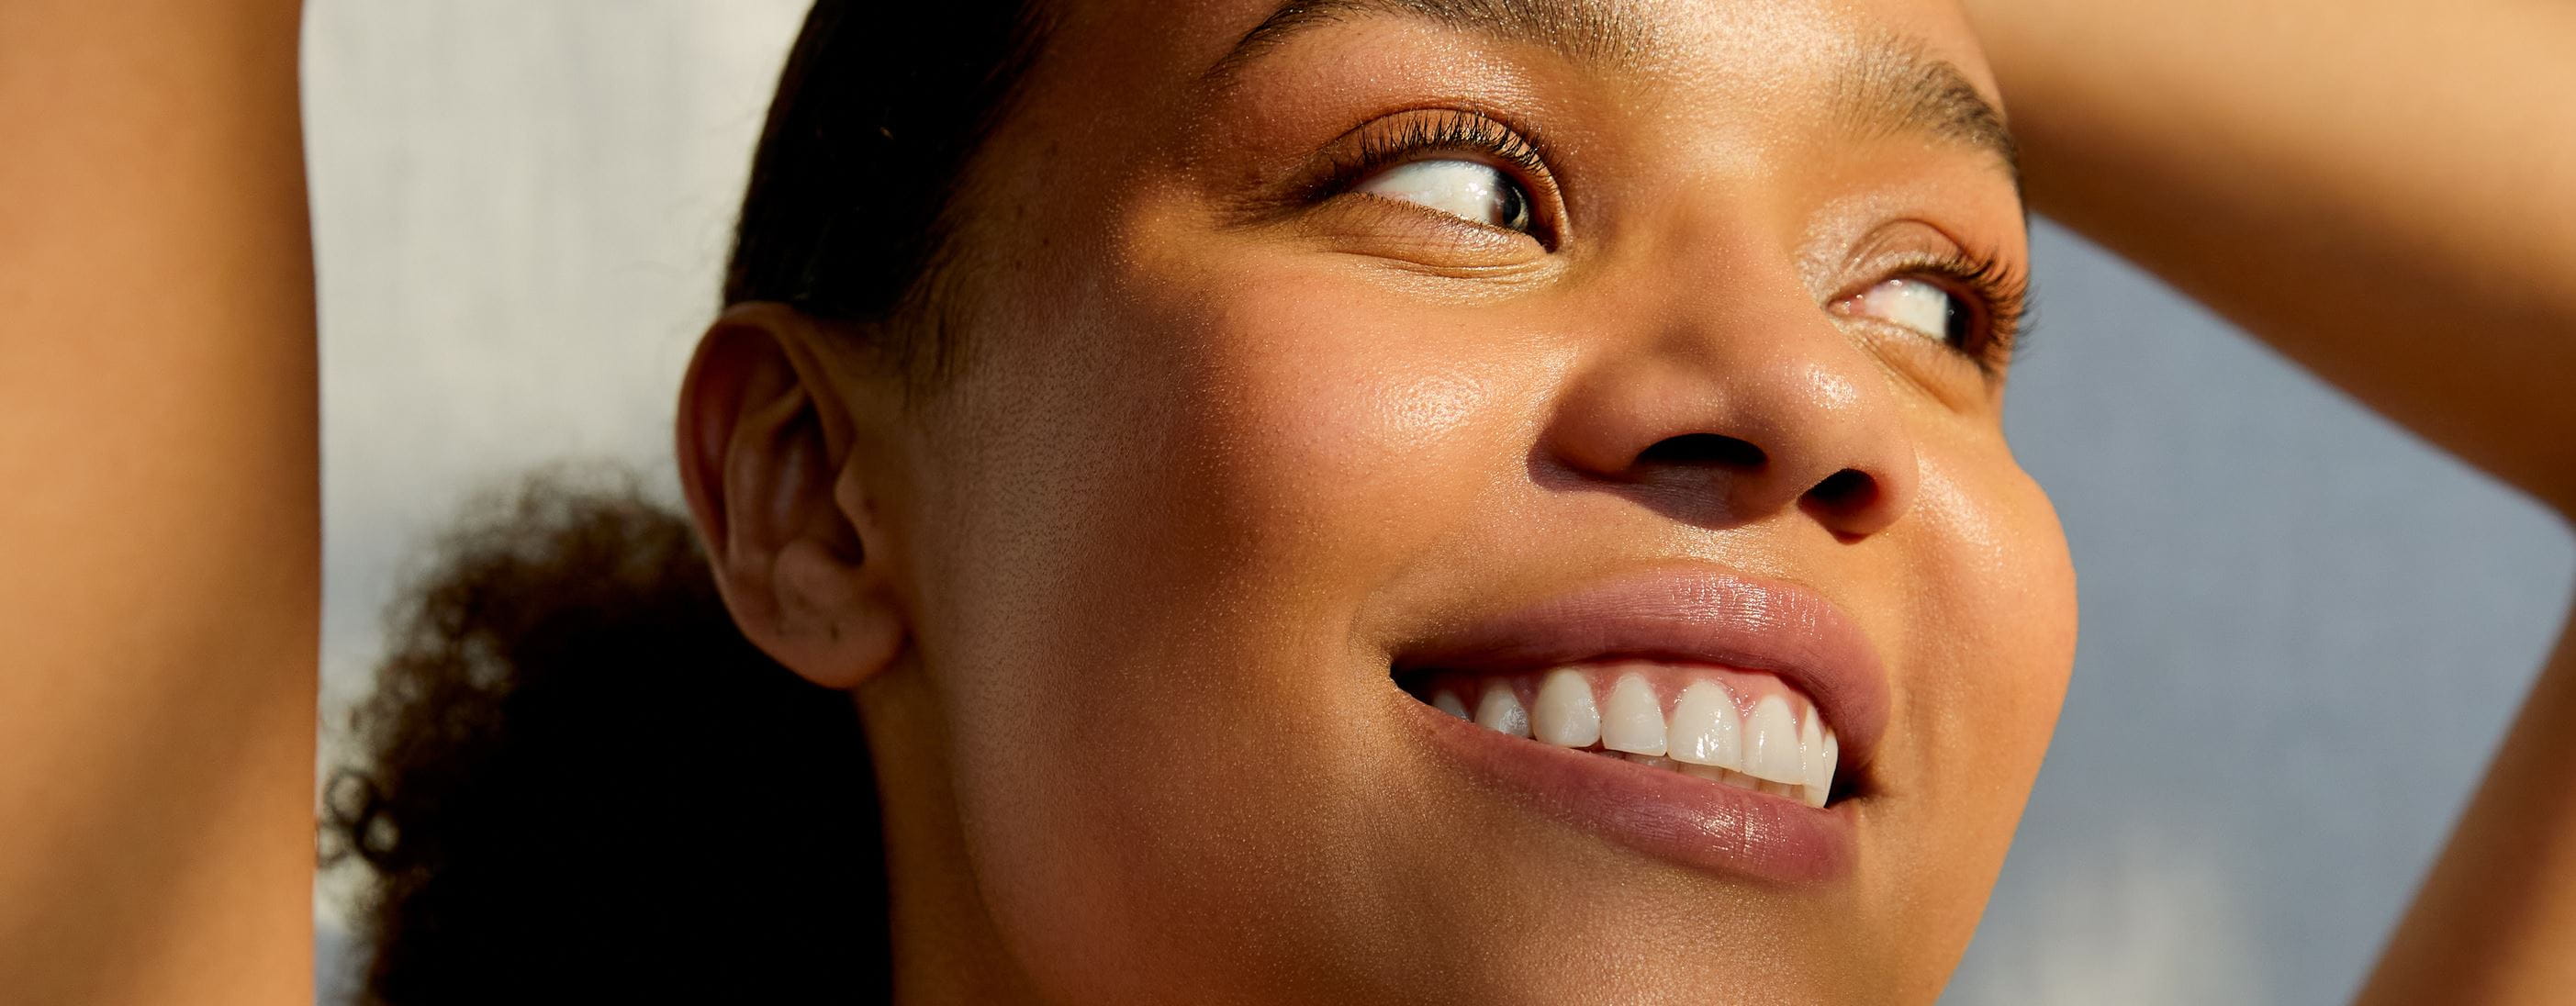 7 causes of textured skin and how to improve it